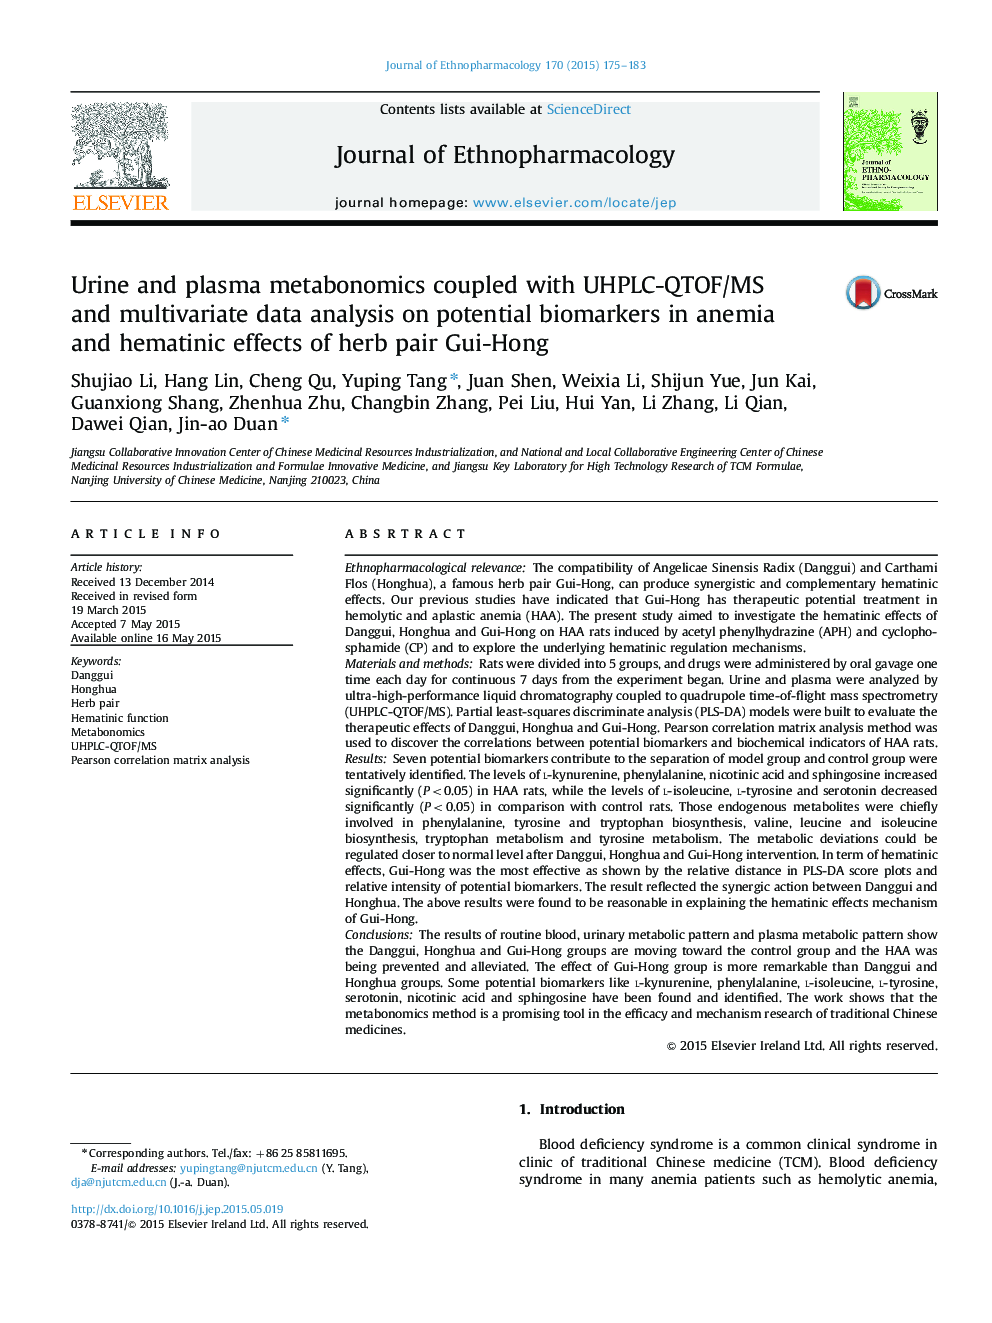 Urine and plasma metabonomics coupled with UHPLC-QTOF/MS and multivariate data analysis on potential biomarkers in anemia and hematinic effects of herb pair Gui-Hong